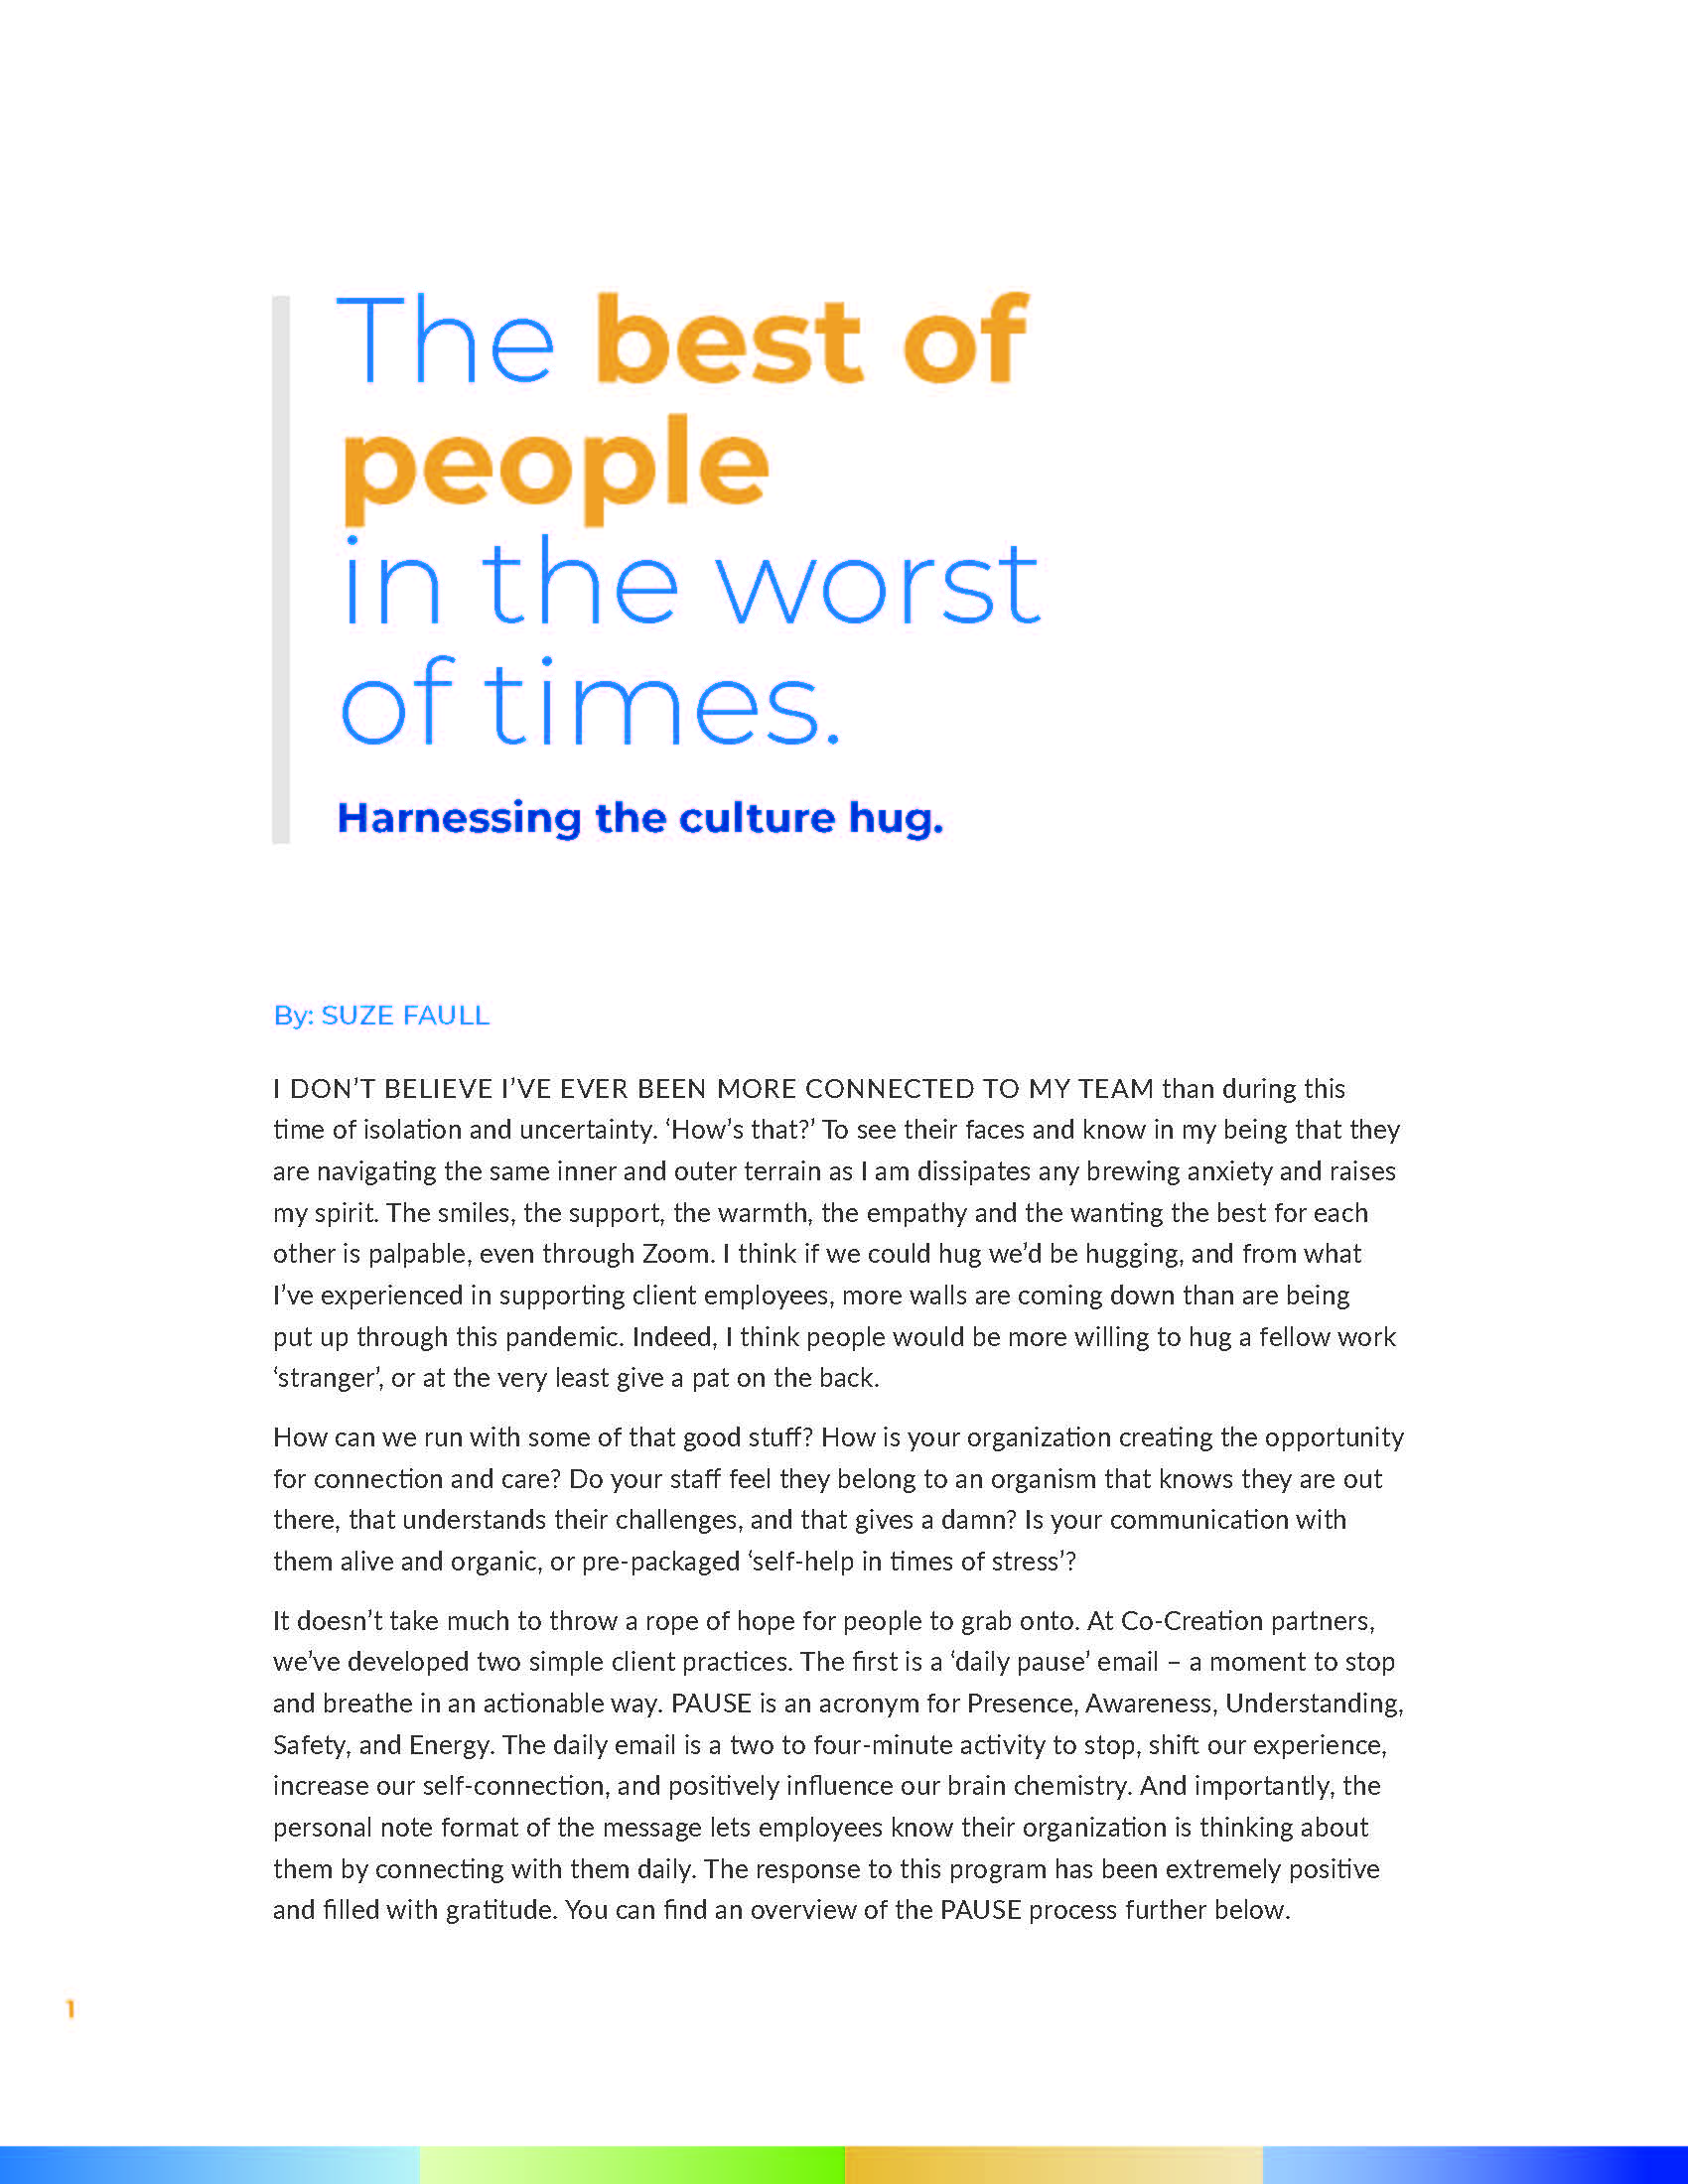 The best of people in the worst of types by Suze Faull